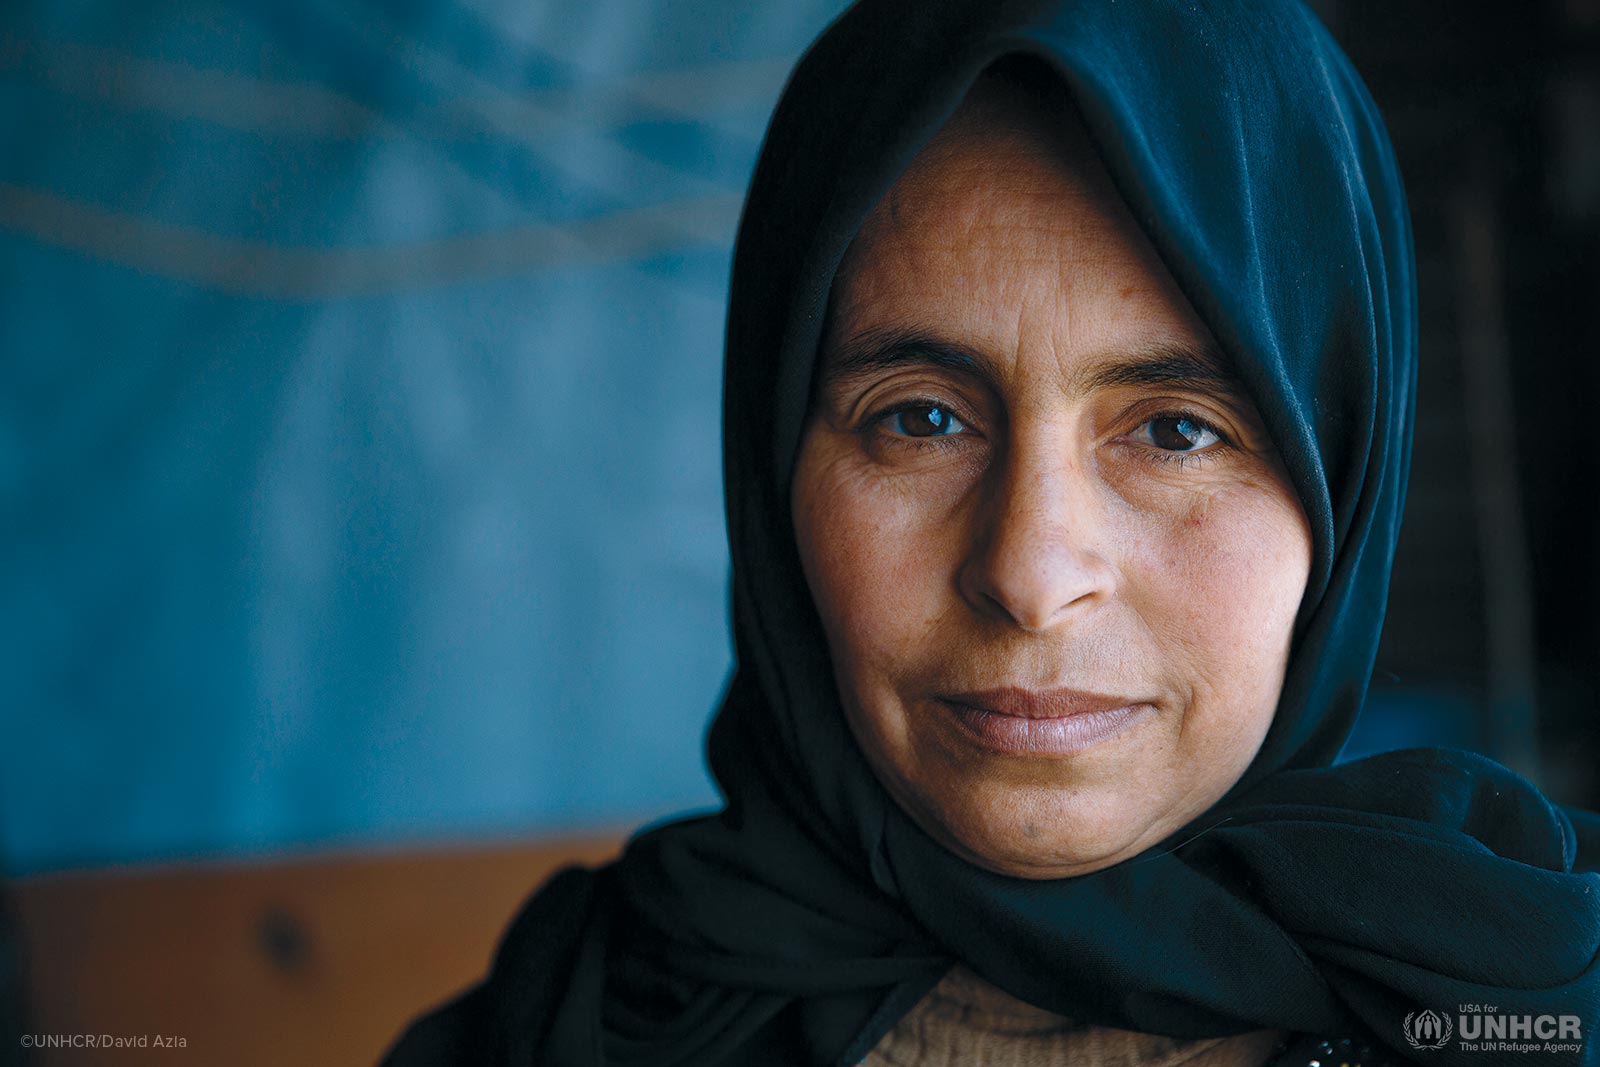 Halima received winterization assistance in order to weatherproof her shelter from the harsh winter